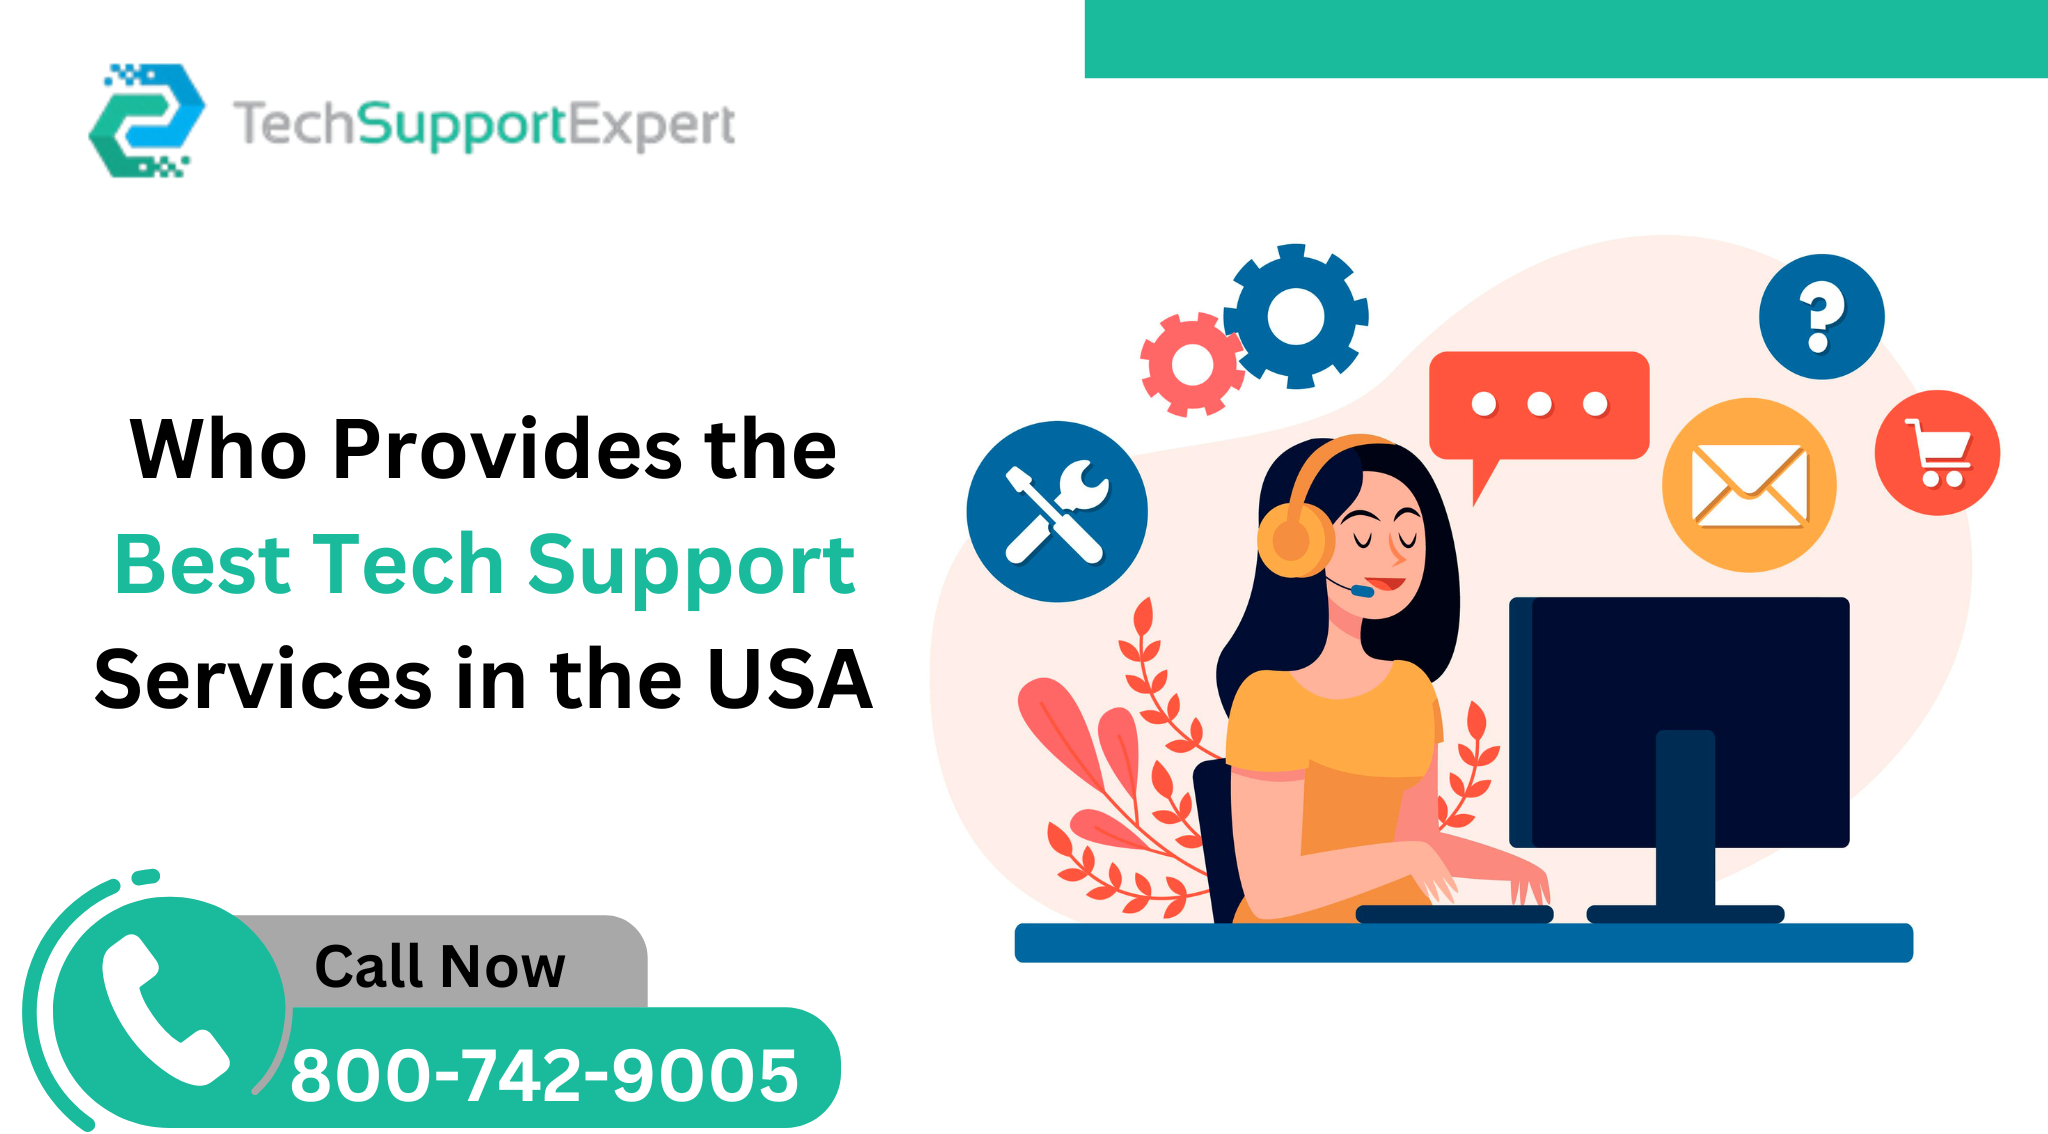 Who Provides the Best Tech Support Services in the USA